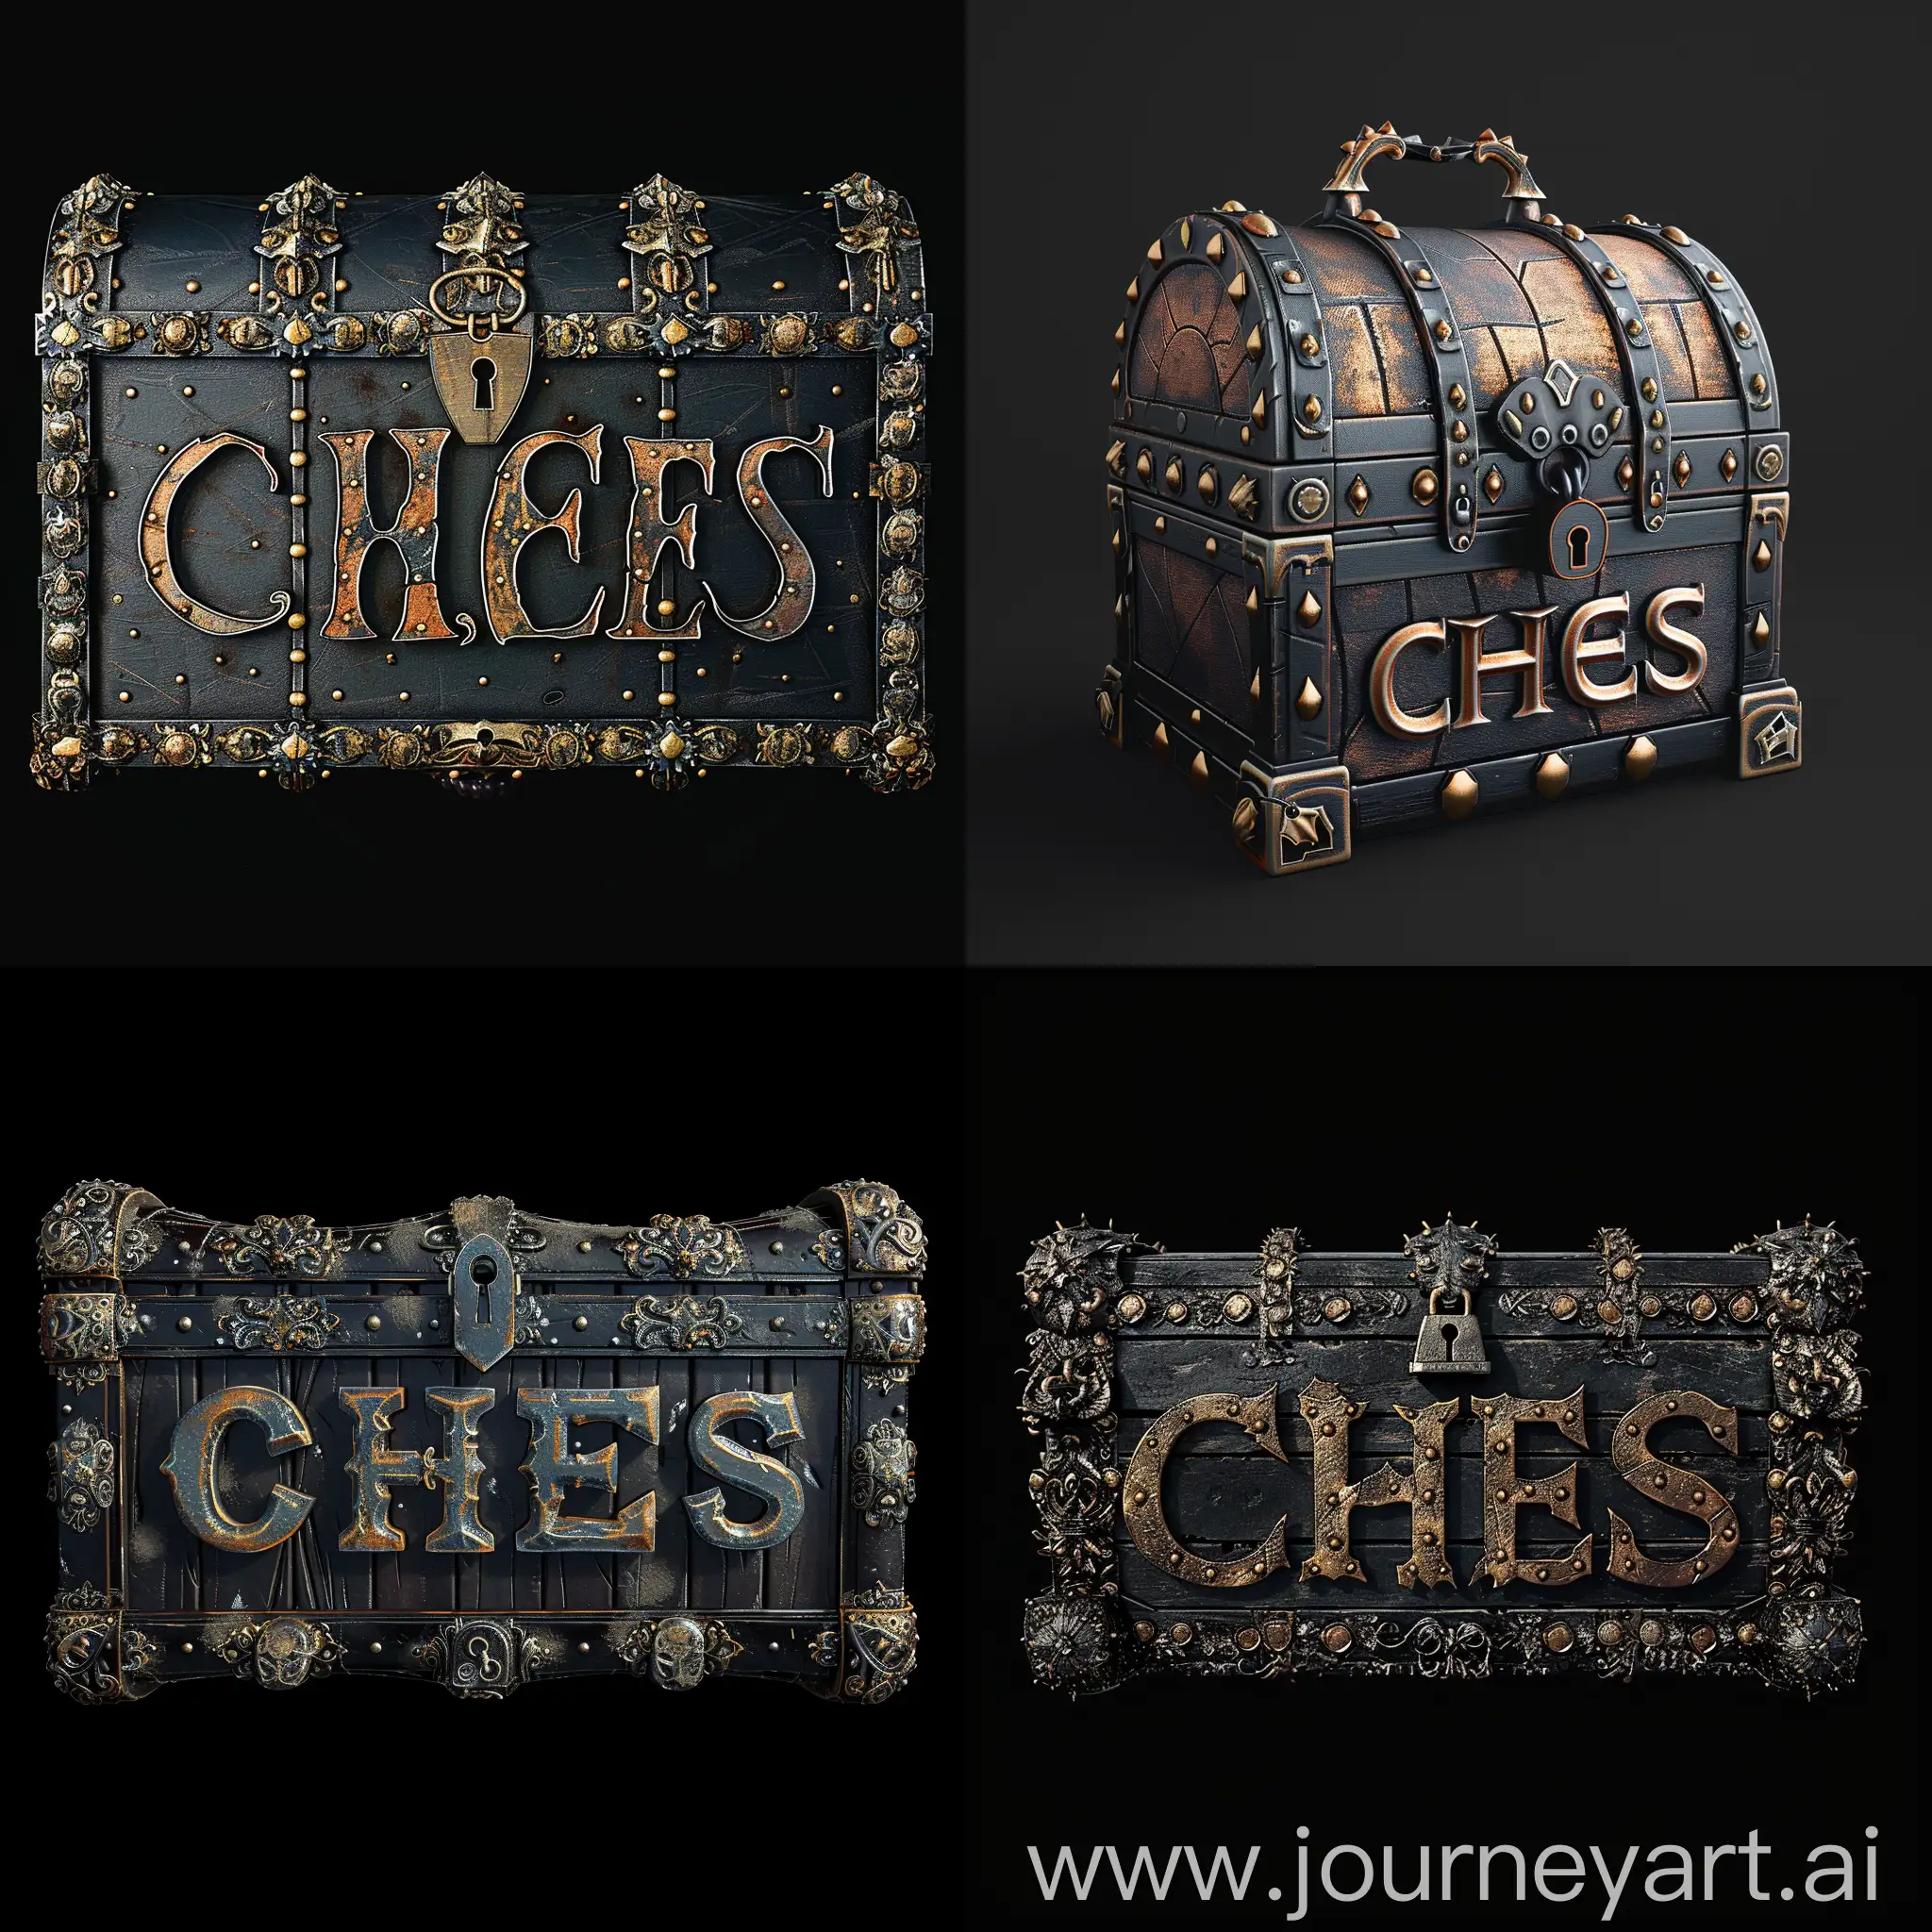 "CHEST" logo could be to design the word in the form of a treasure chest, the letters could be stylized to resemble the shape of a chest complete with a curved lid lock and decorative details, --s 200